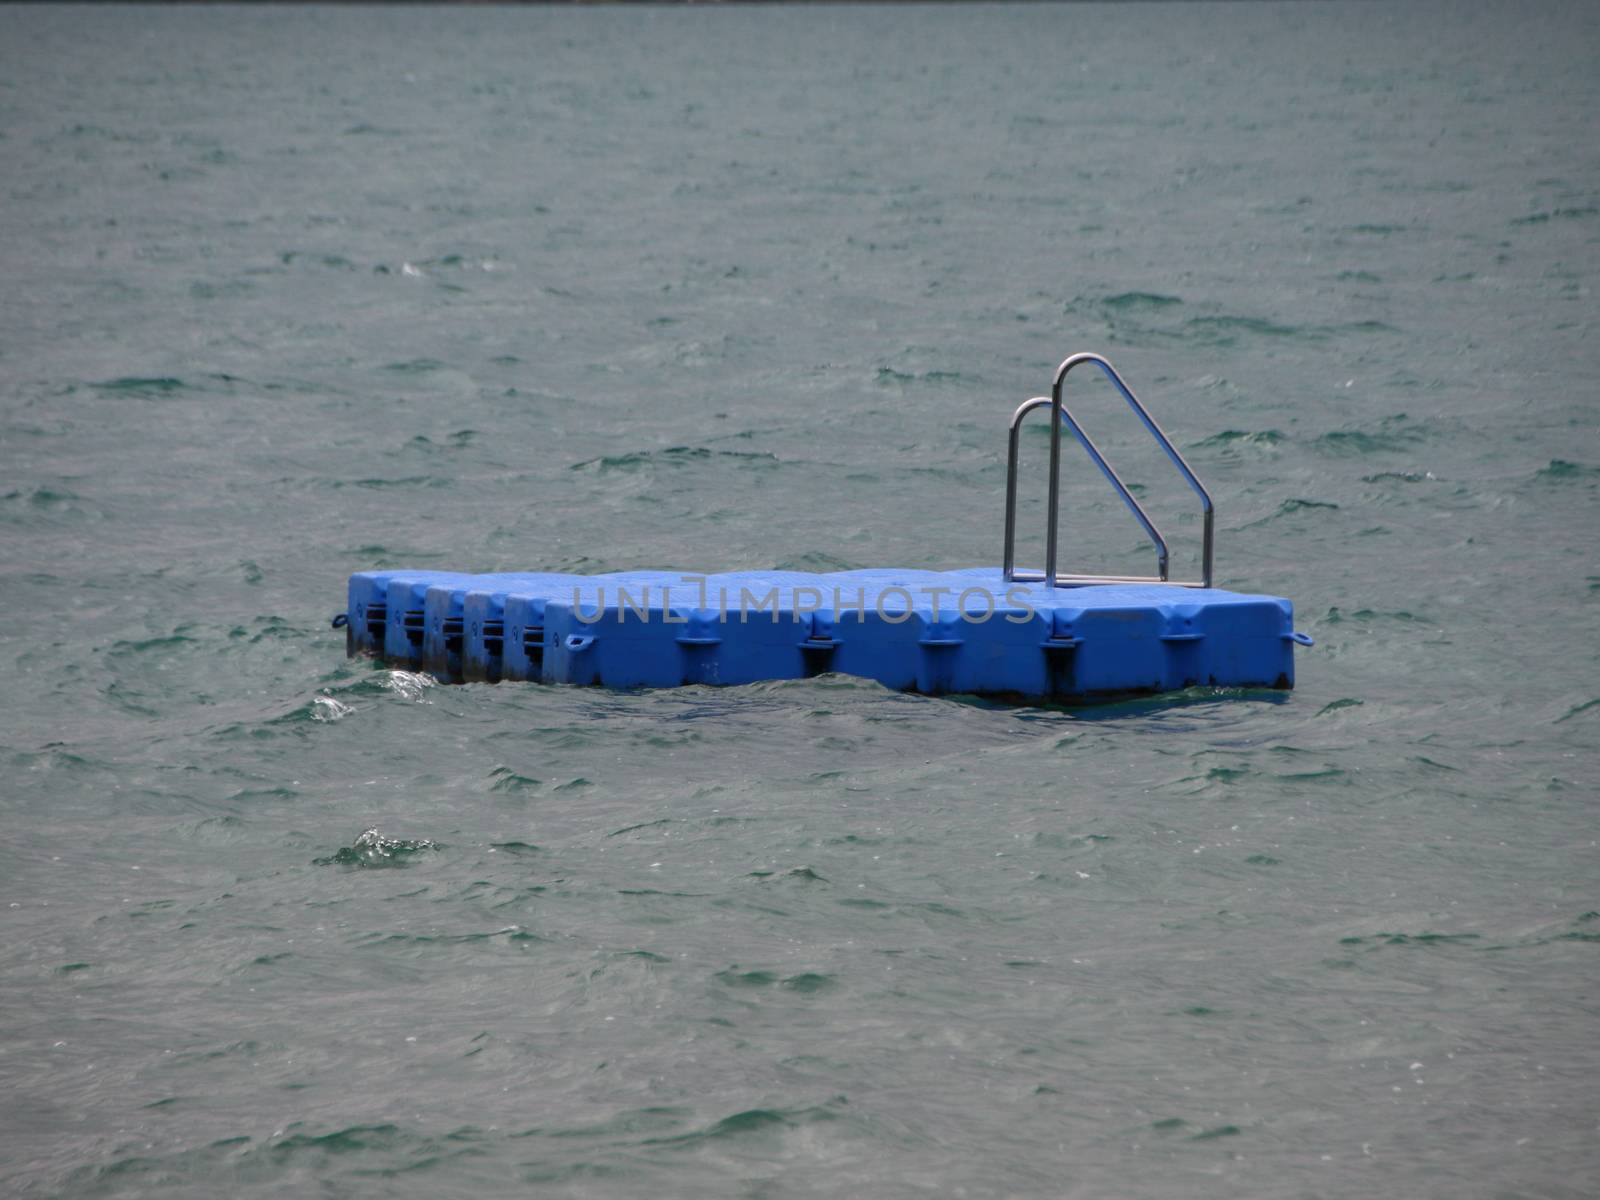 Isolated Blue Ponton Swimming Platform on Stormy Water by HoleInTheBox